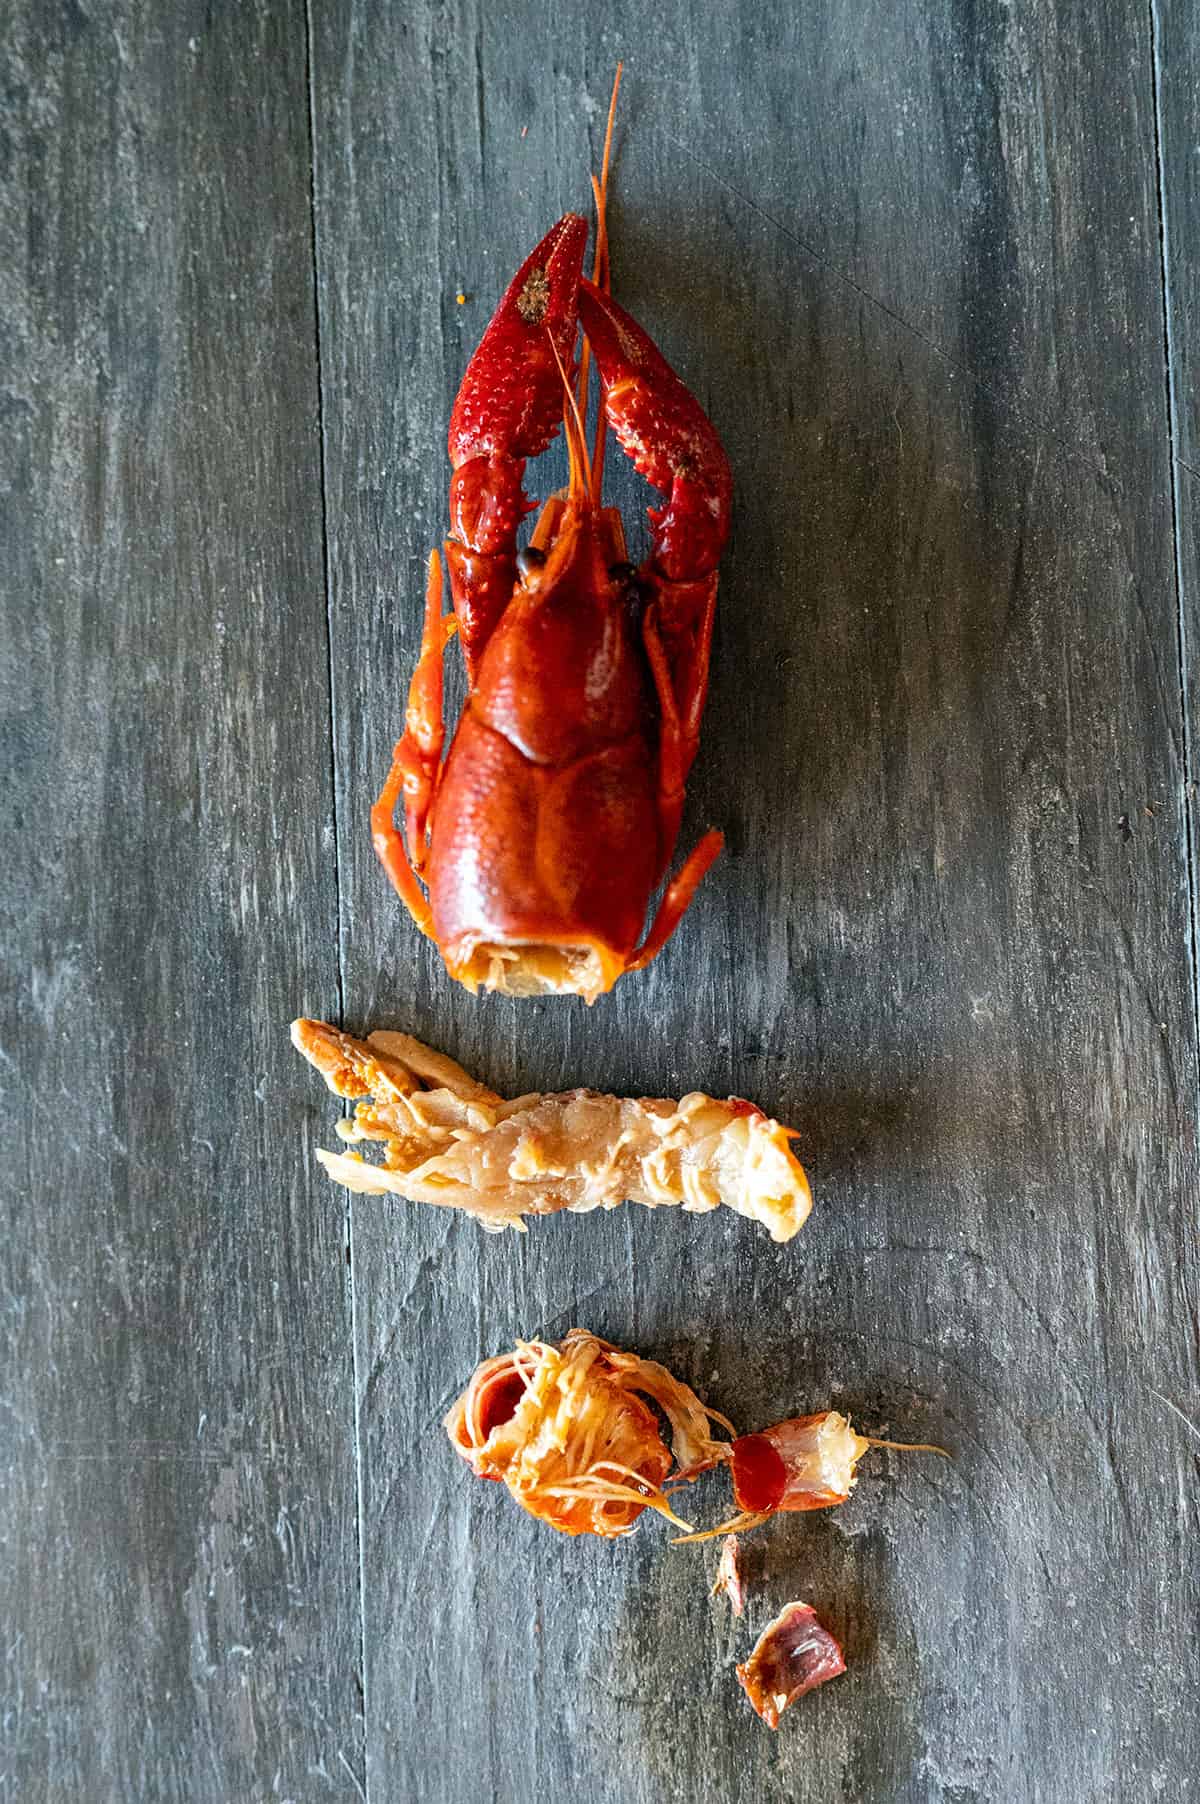 tail meat removed from crawfish shell.